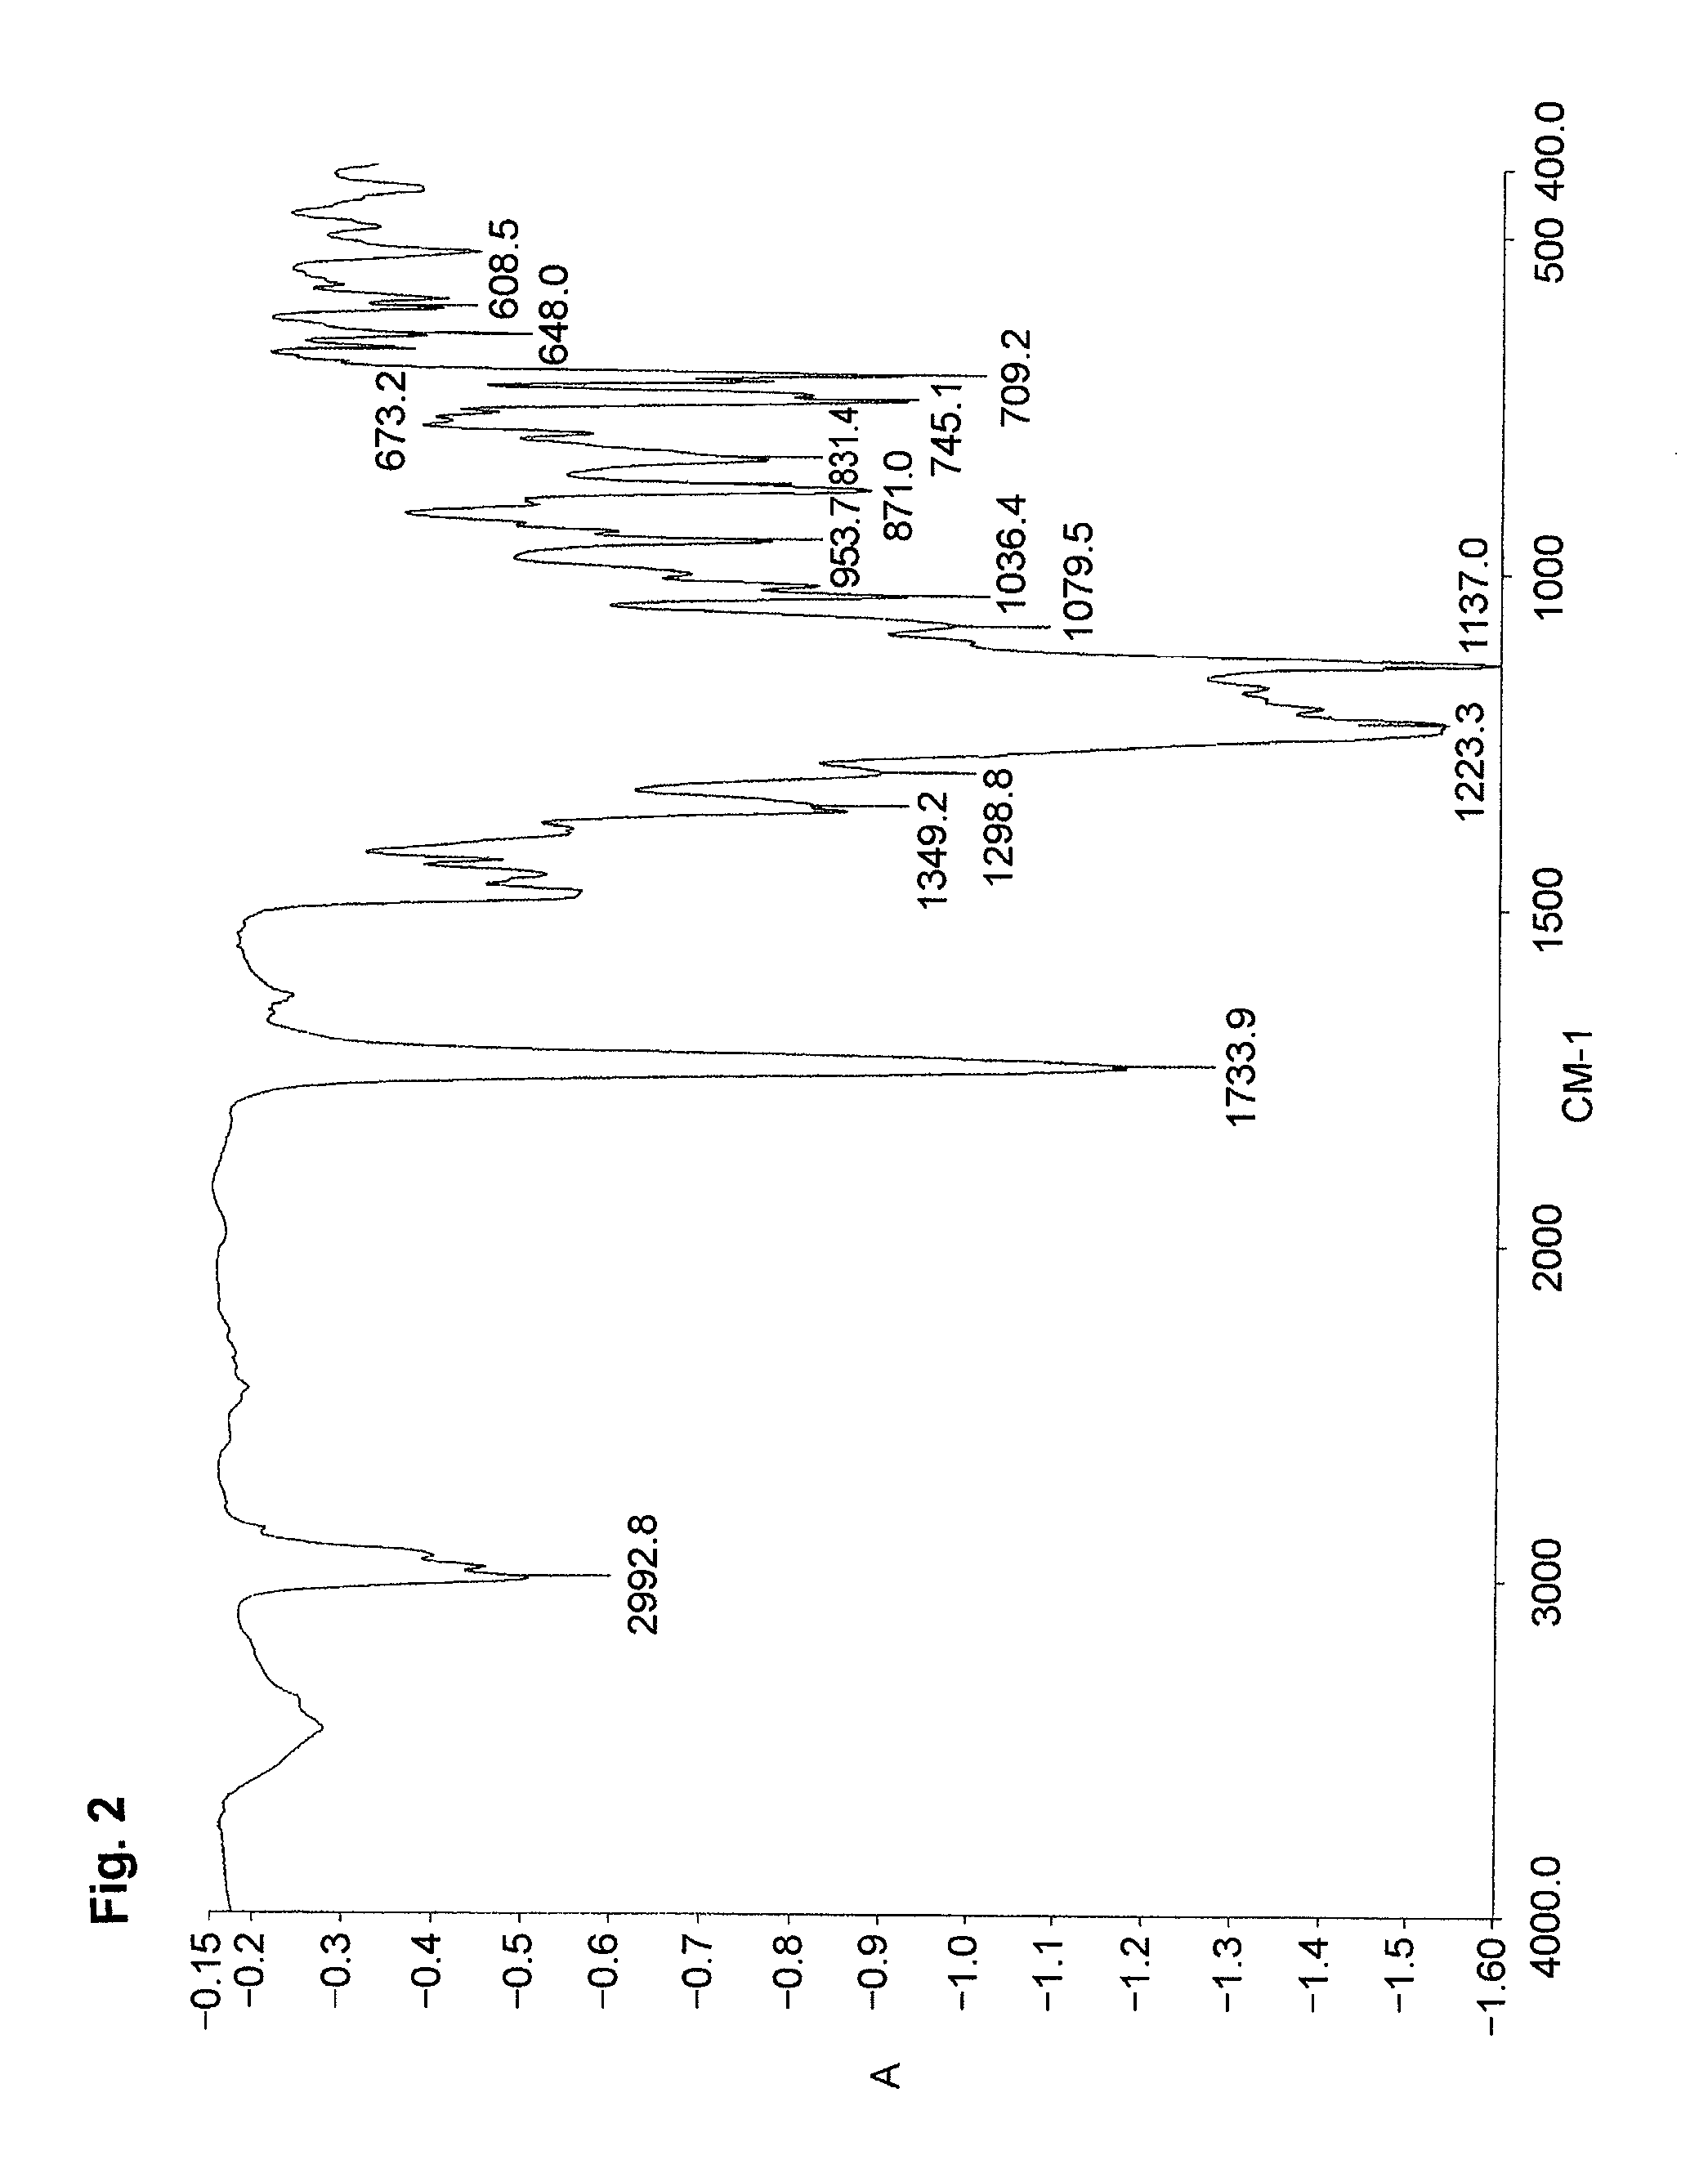 Fluoropolymer having S-sulfate group and water/oil repellent composition containing the polymer